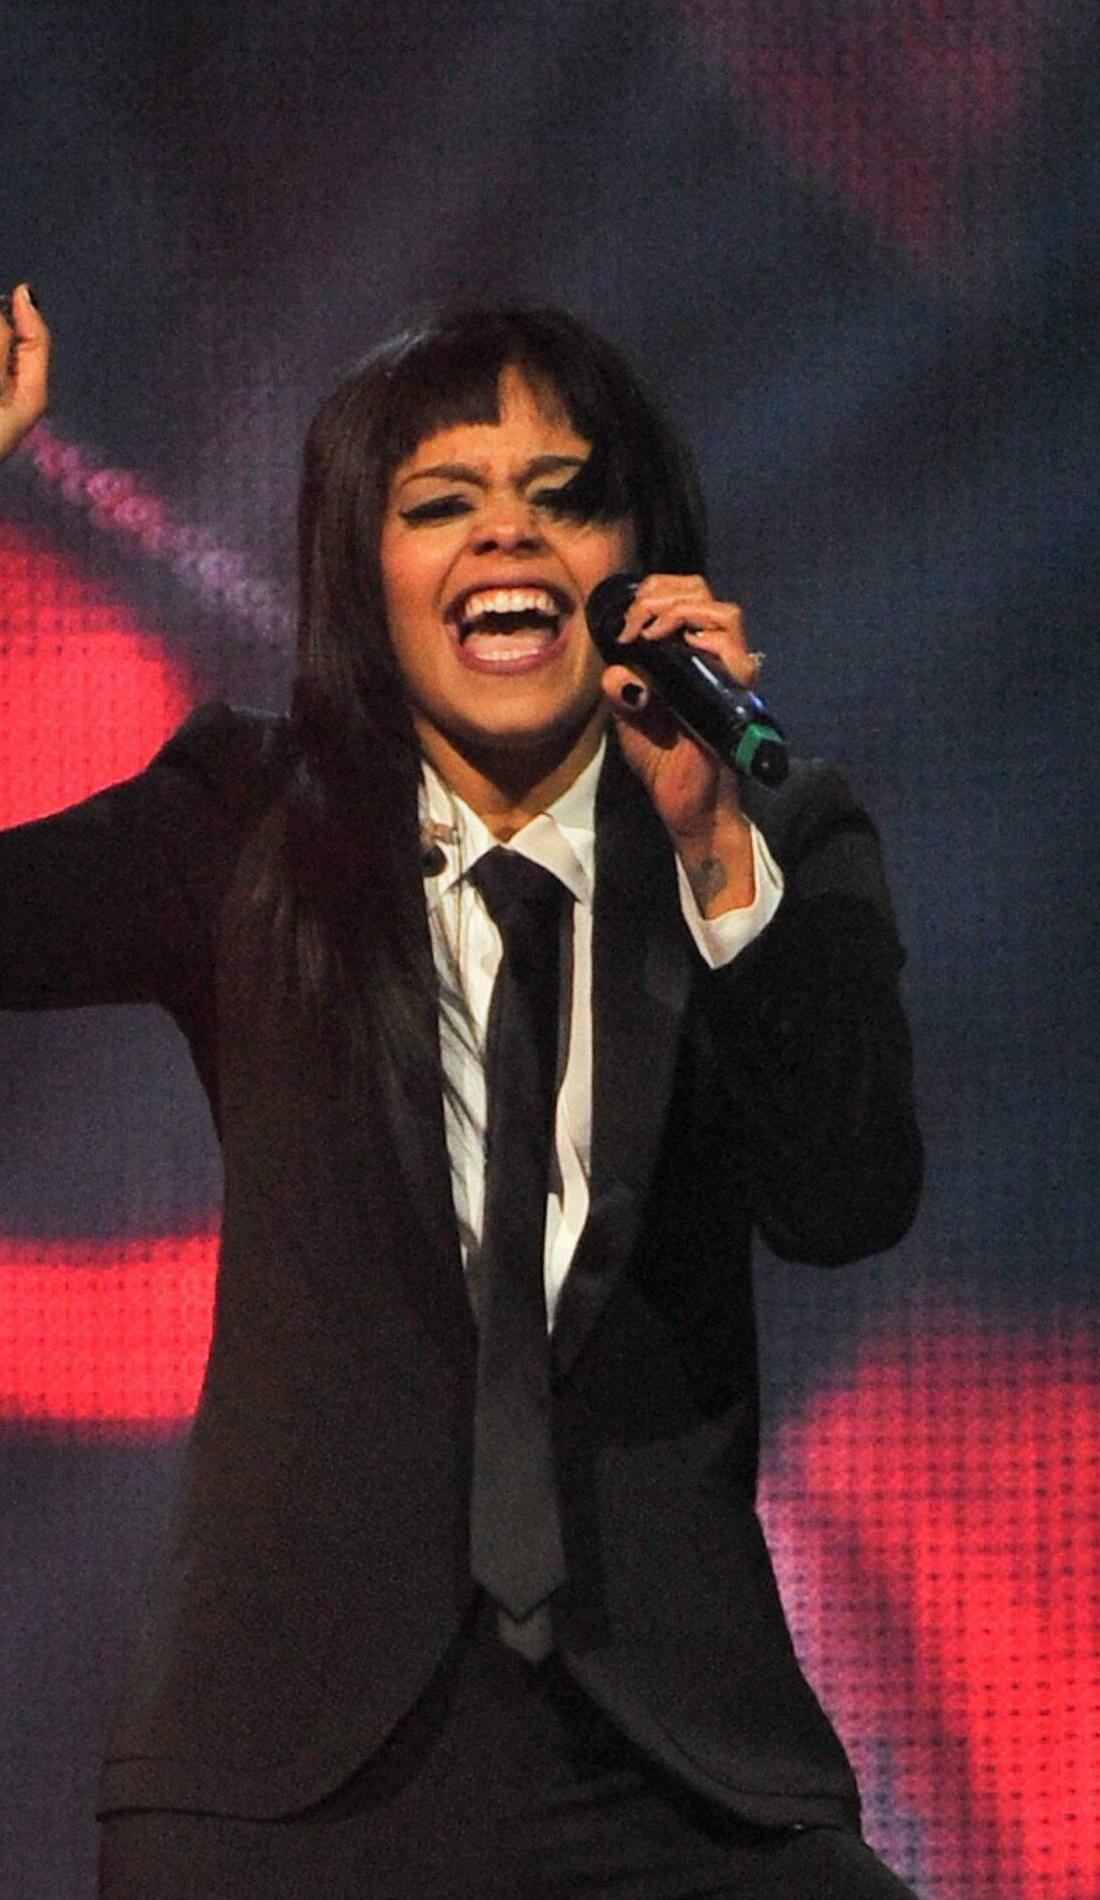 A Fefe Dobson live event